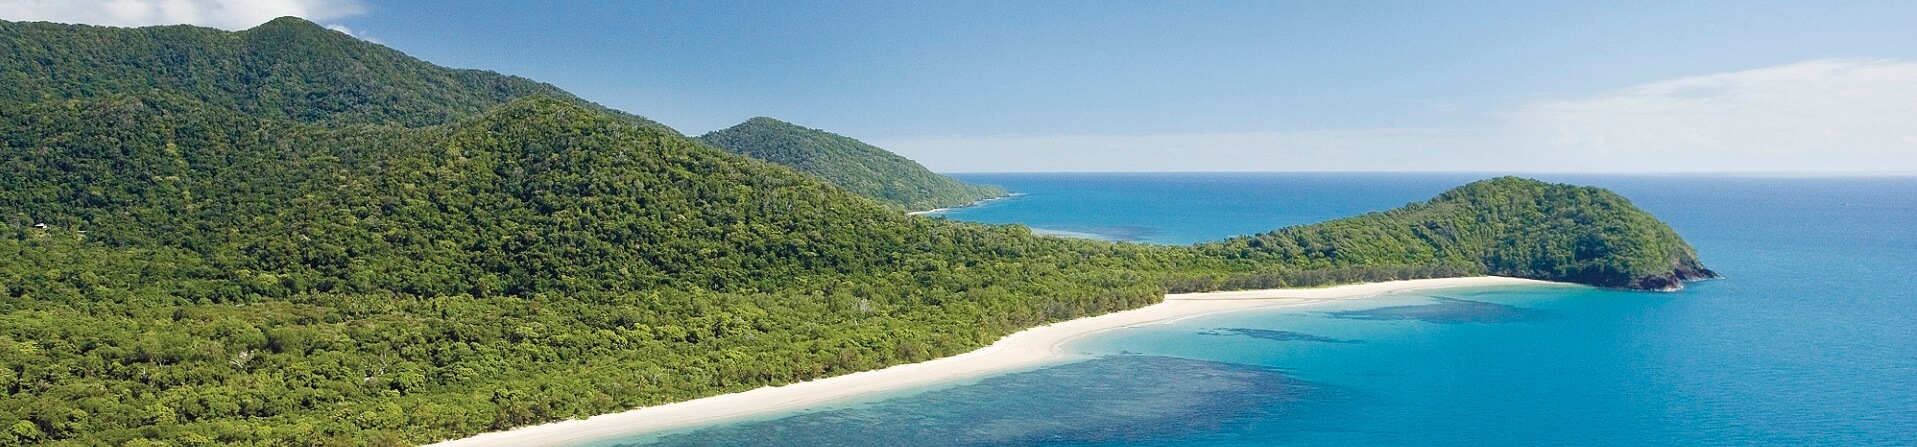 How many days do you need in Cape Tribulation?